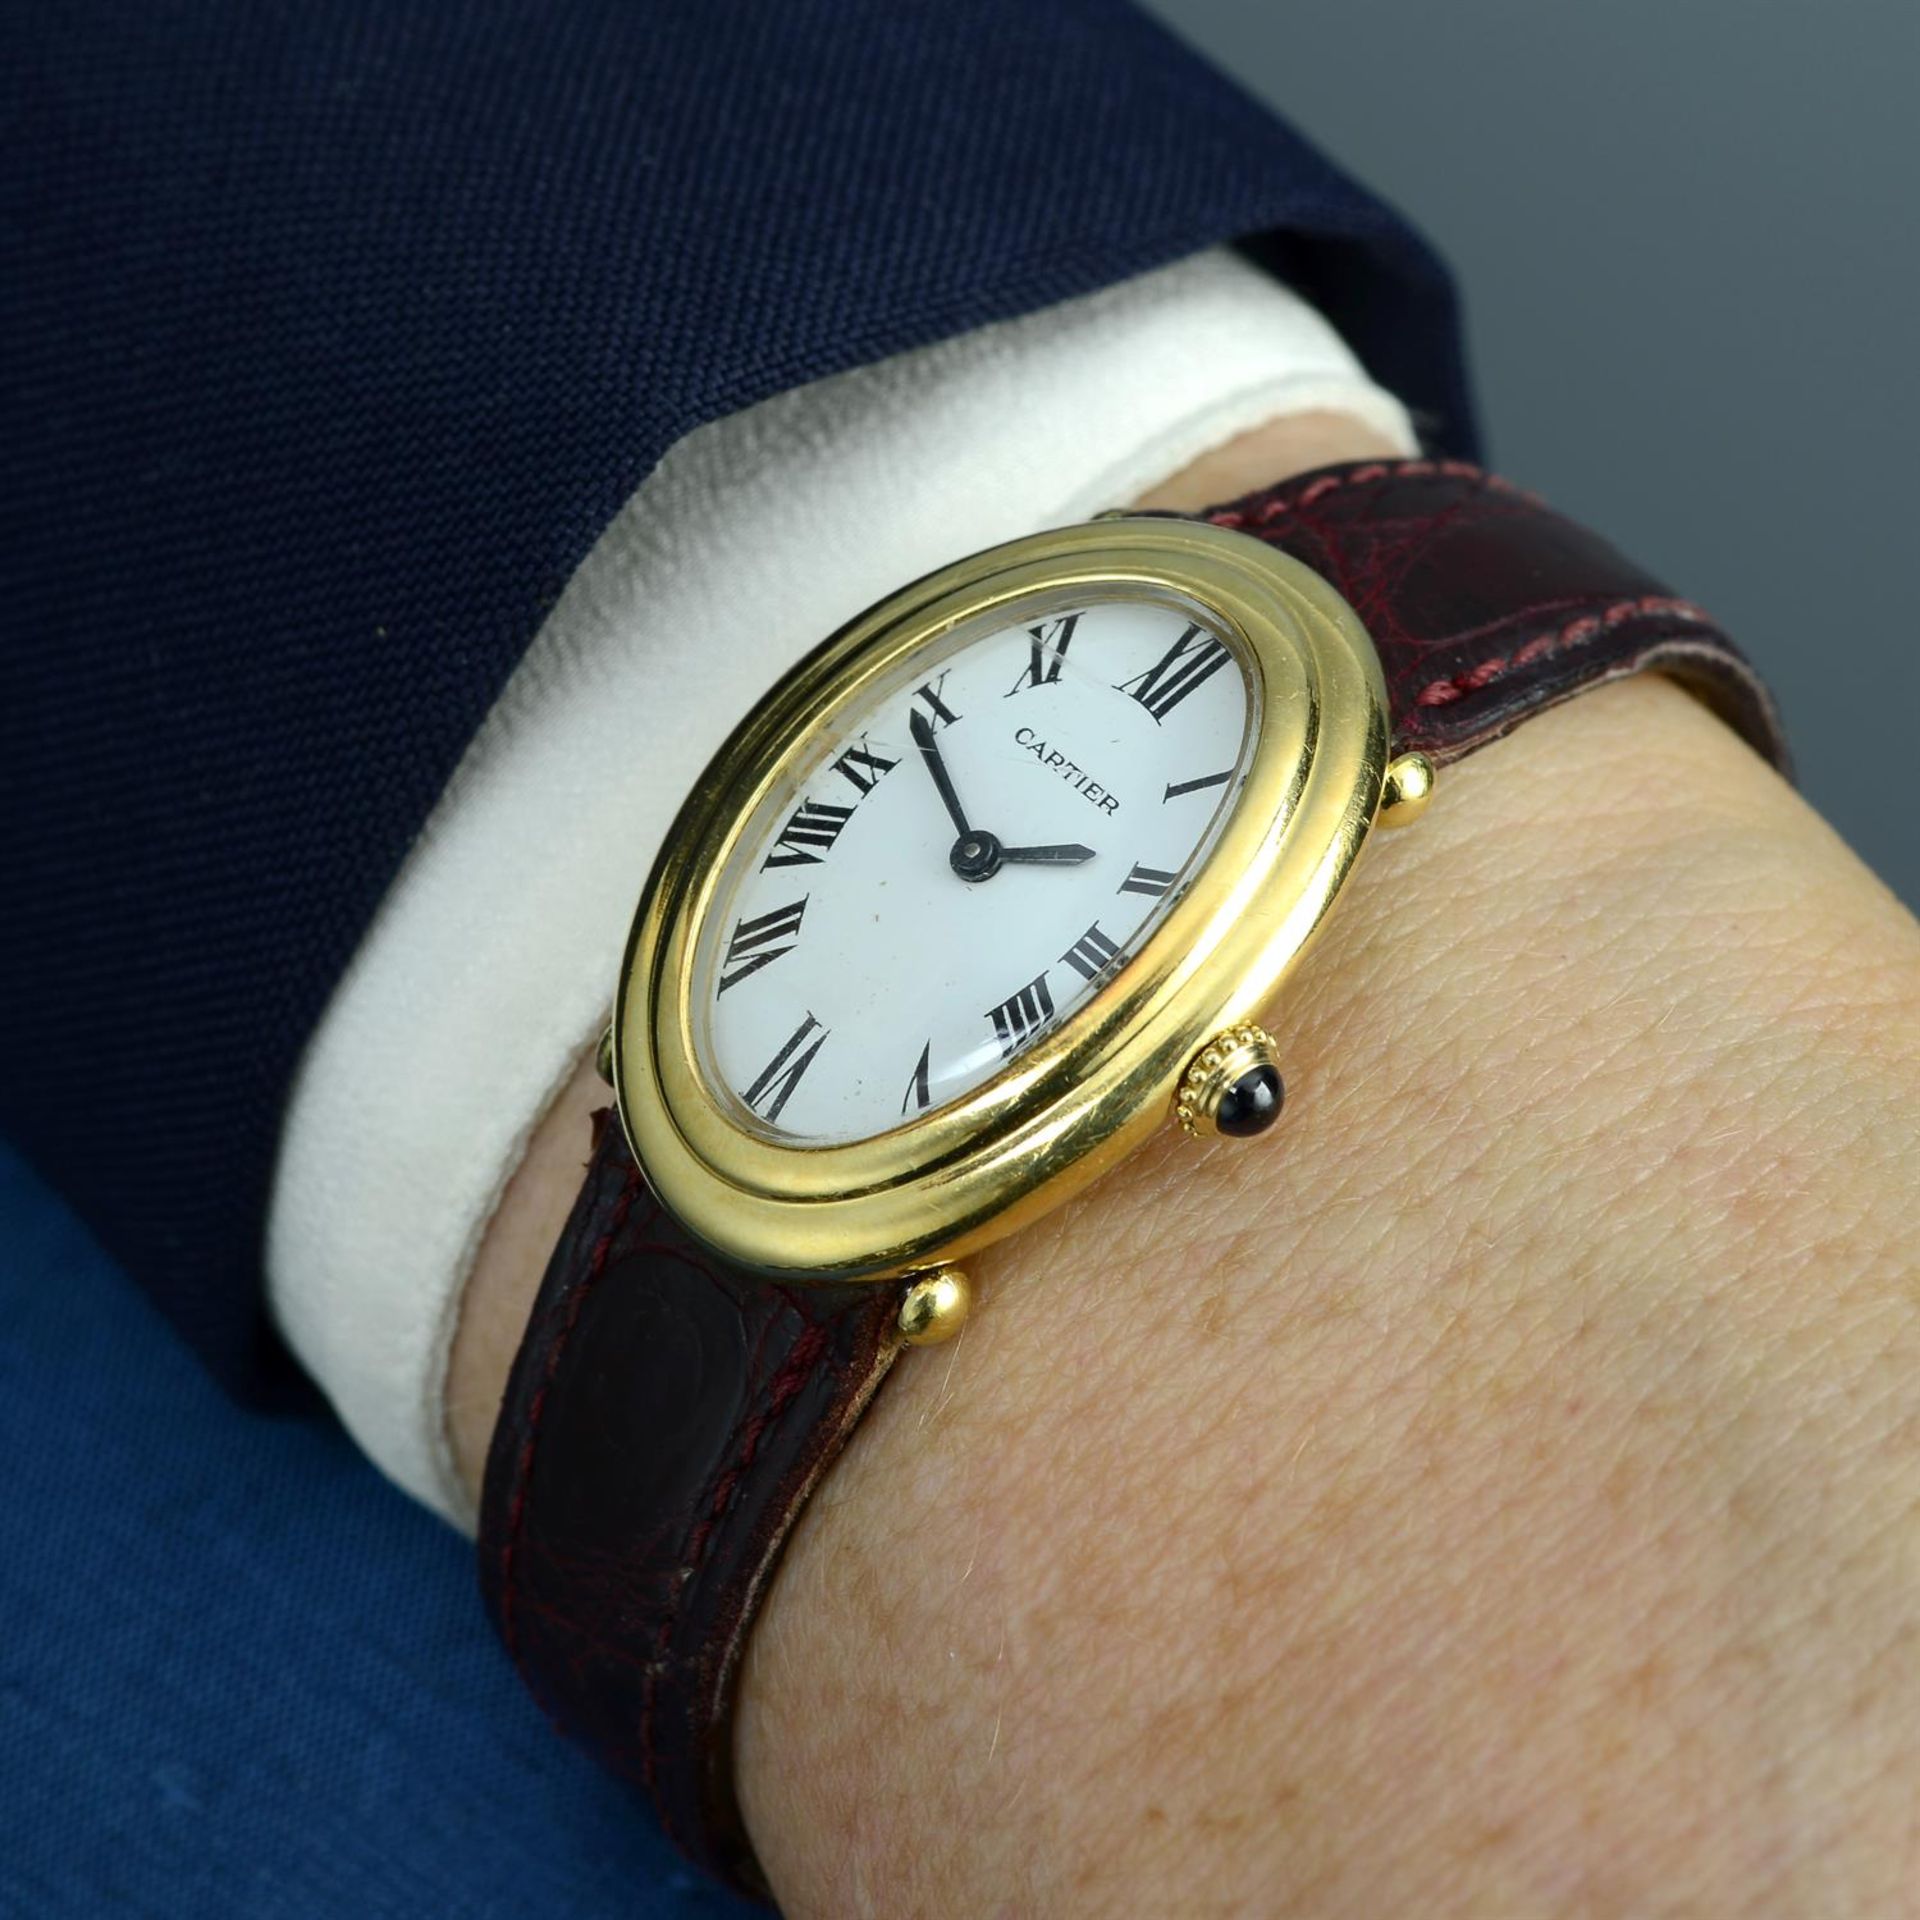 CARTIER - a yellow metal Baignoire wrist watch, 22mm. - Image 5 of 5